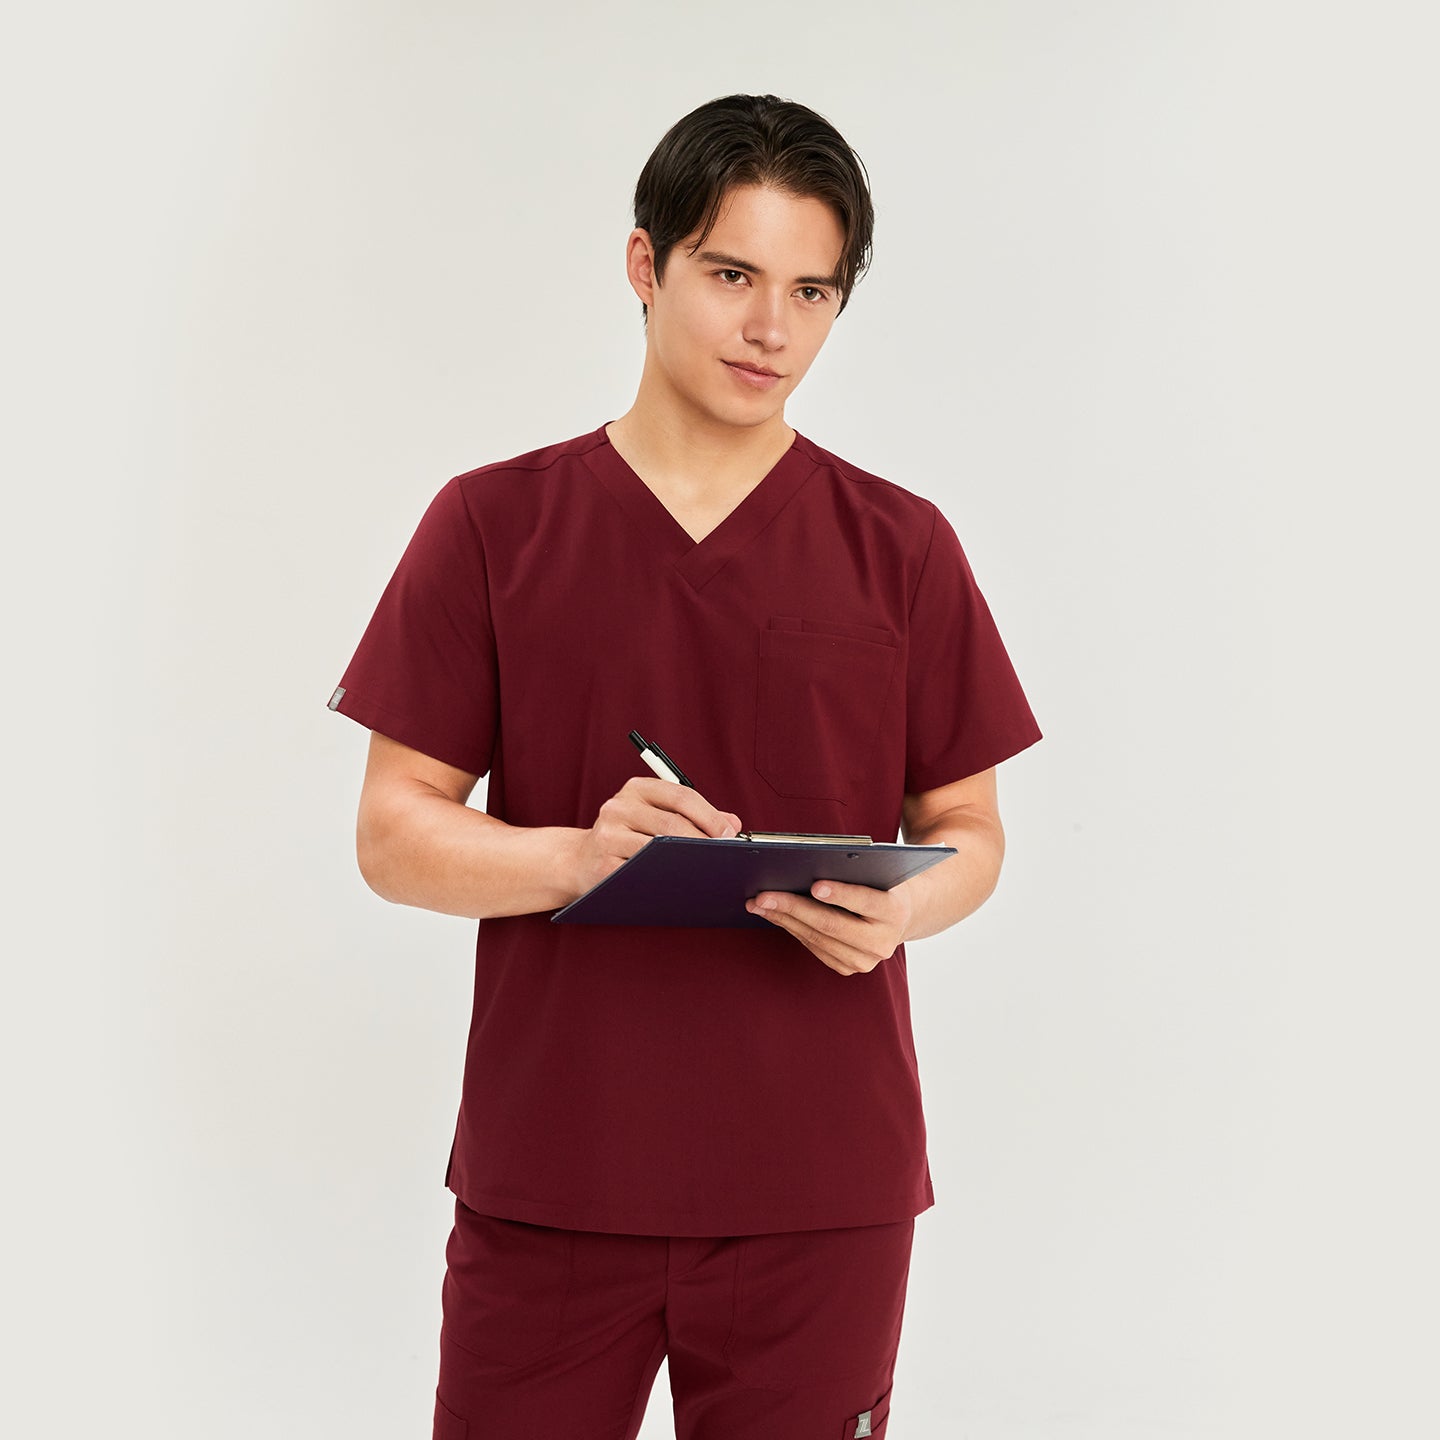 Male model wearing a scrub top with a chest pocket, paired with matching scrub pants with a drawstring, looking to the side,Burgundy